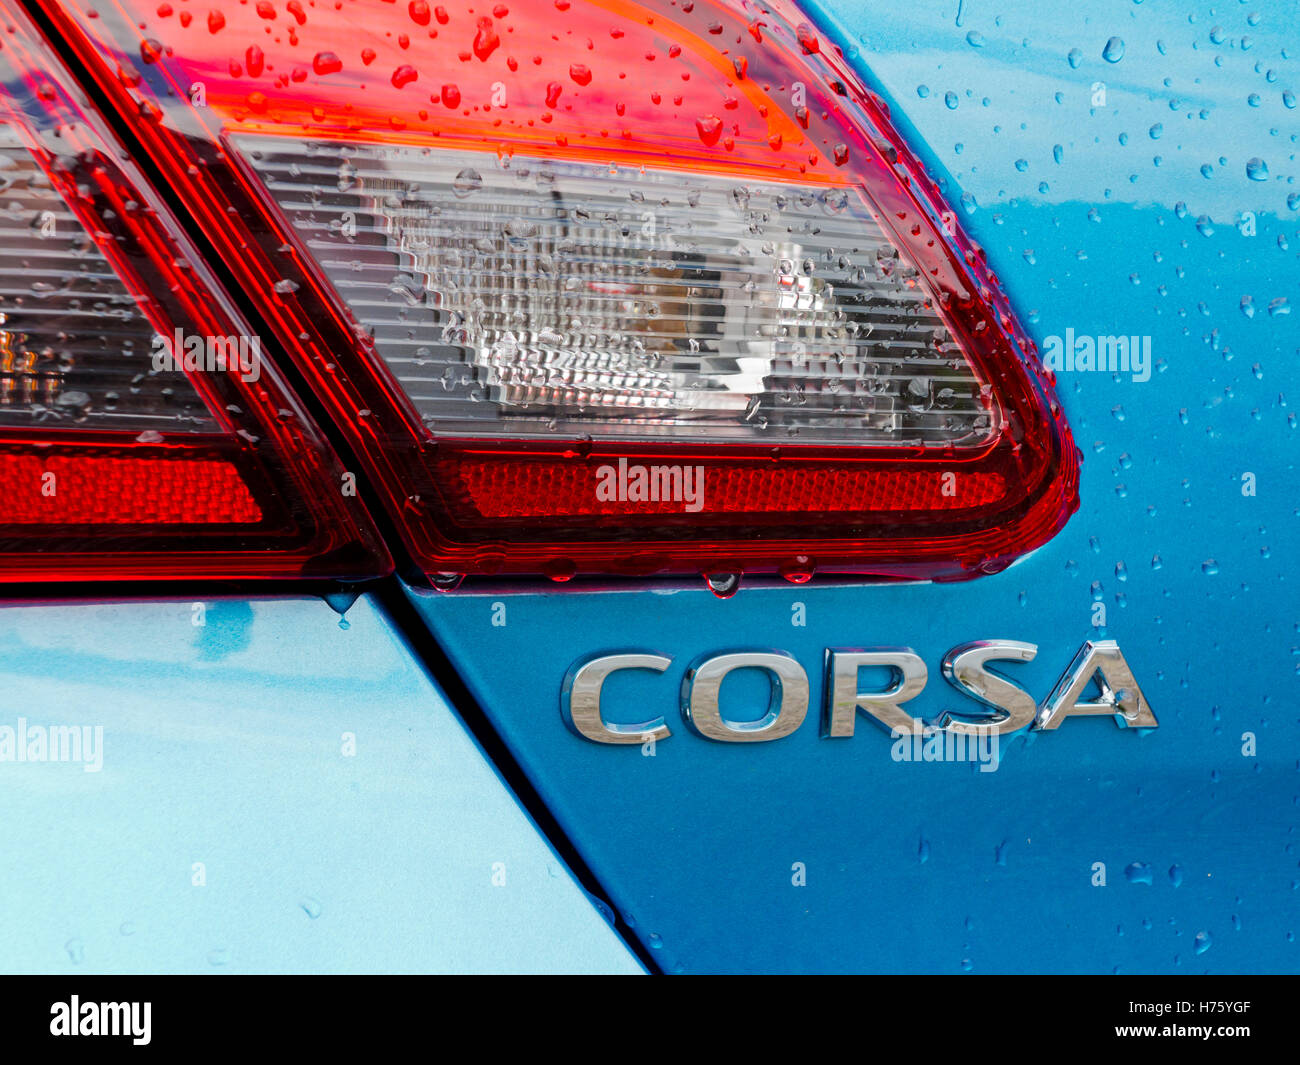 Close up view of metallic blue 2016 model Vauxhall Corsa car with water drops on body and rear light cluster Stock Photo